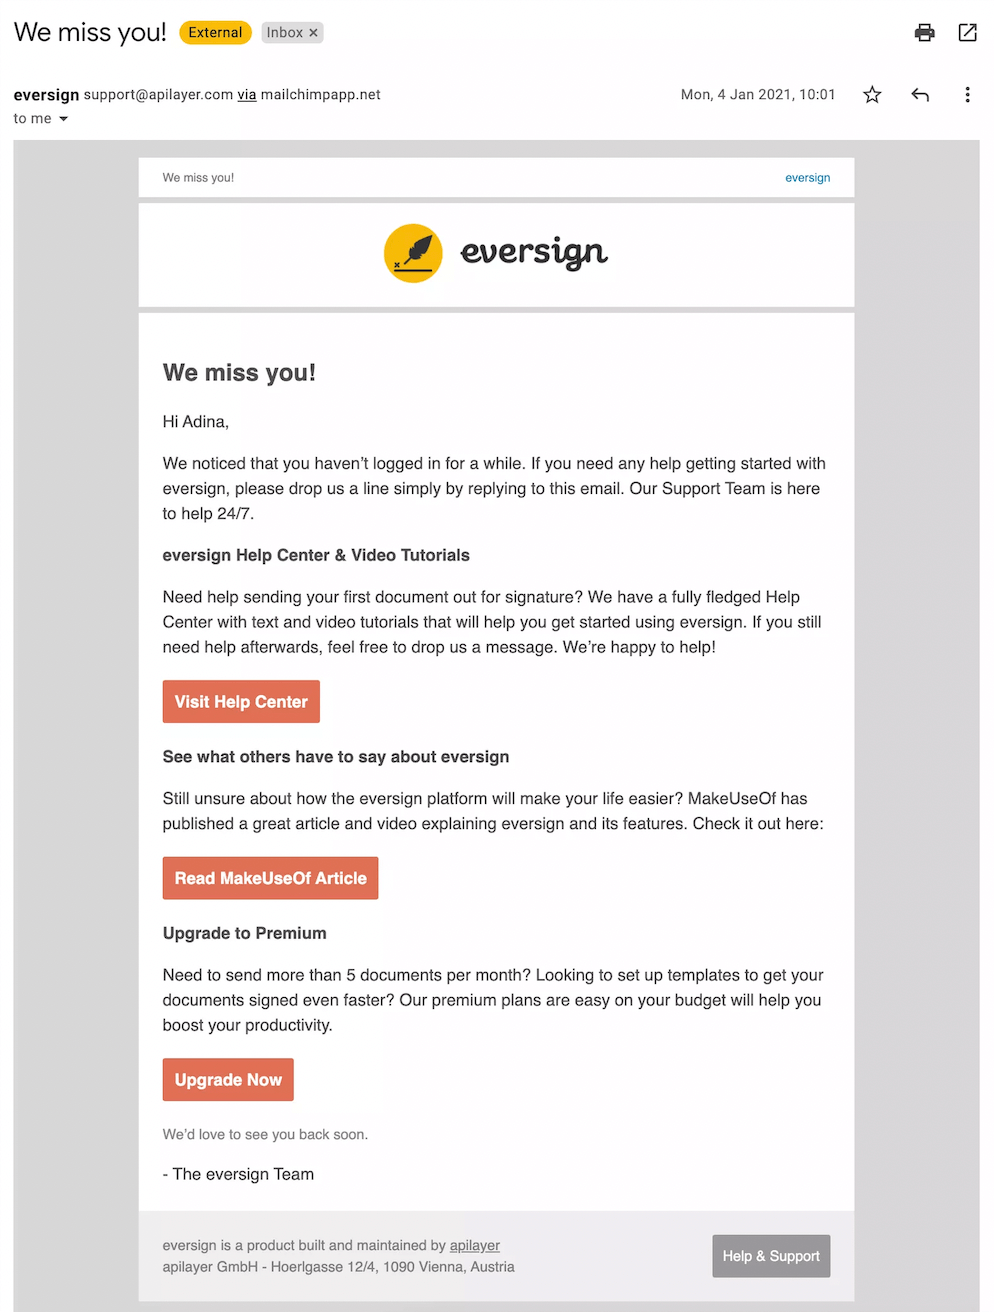 SaaS Re-engagement Emails: Screenshot of Eversign's email